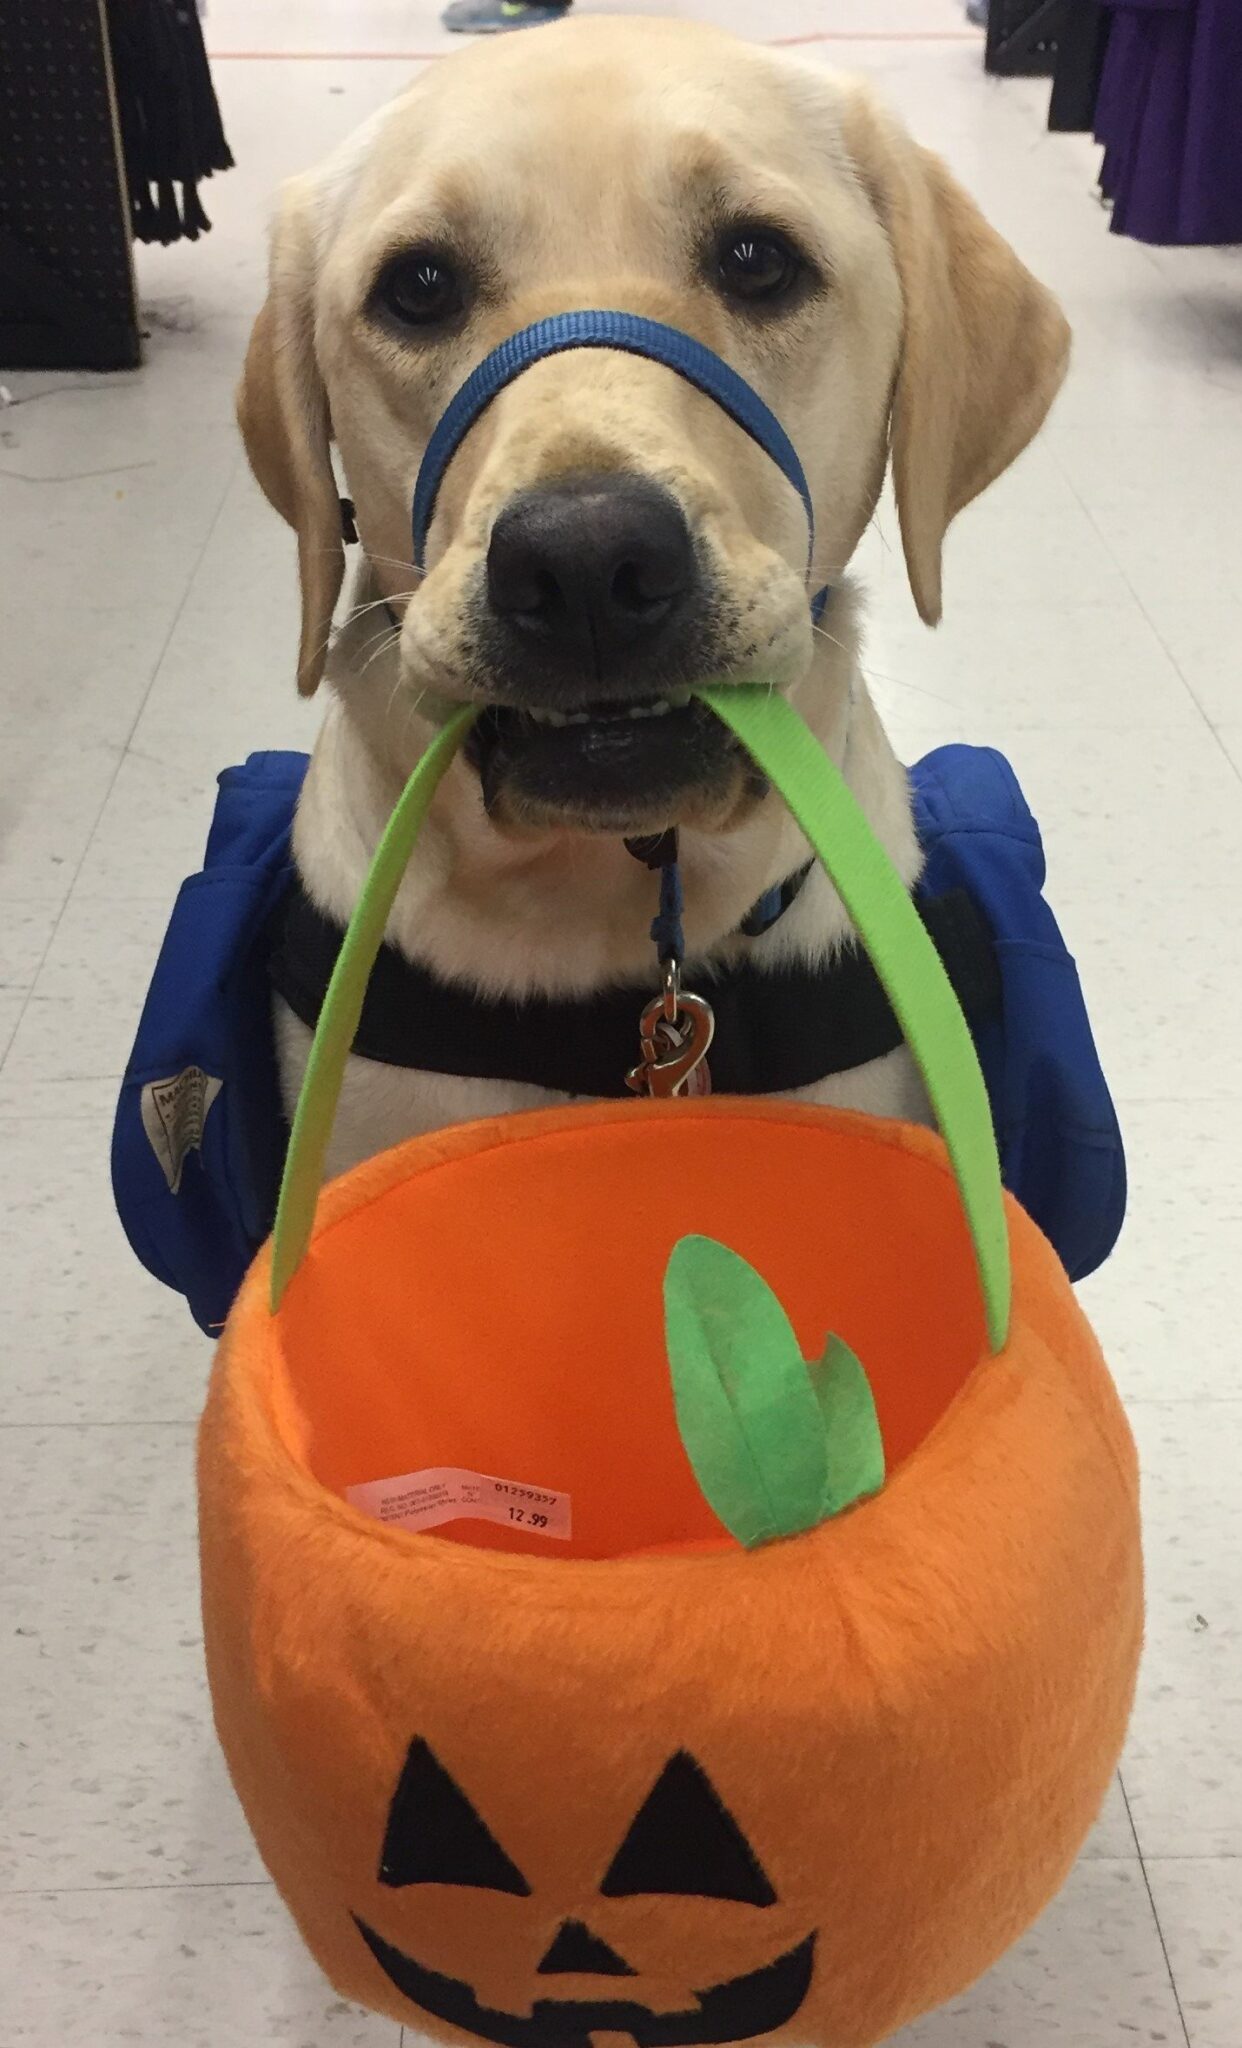 Halloween can be scary for pups, warns dog whisperers